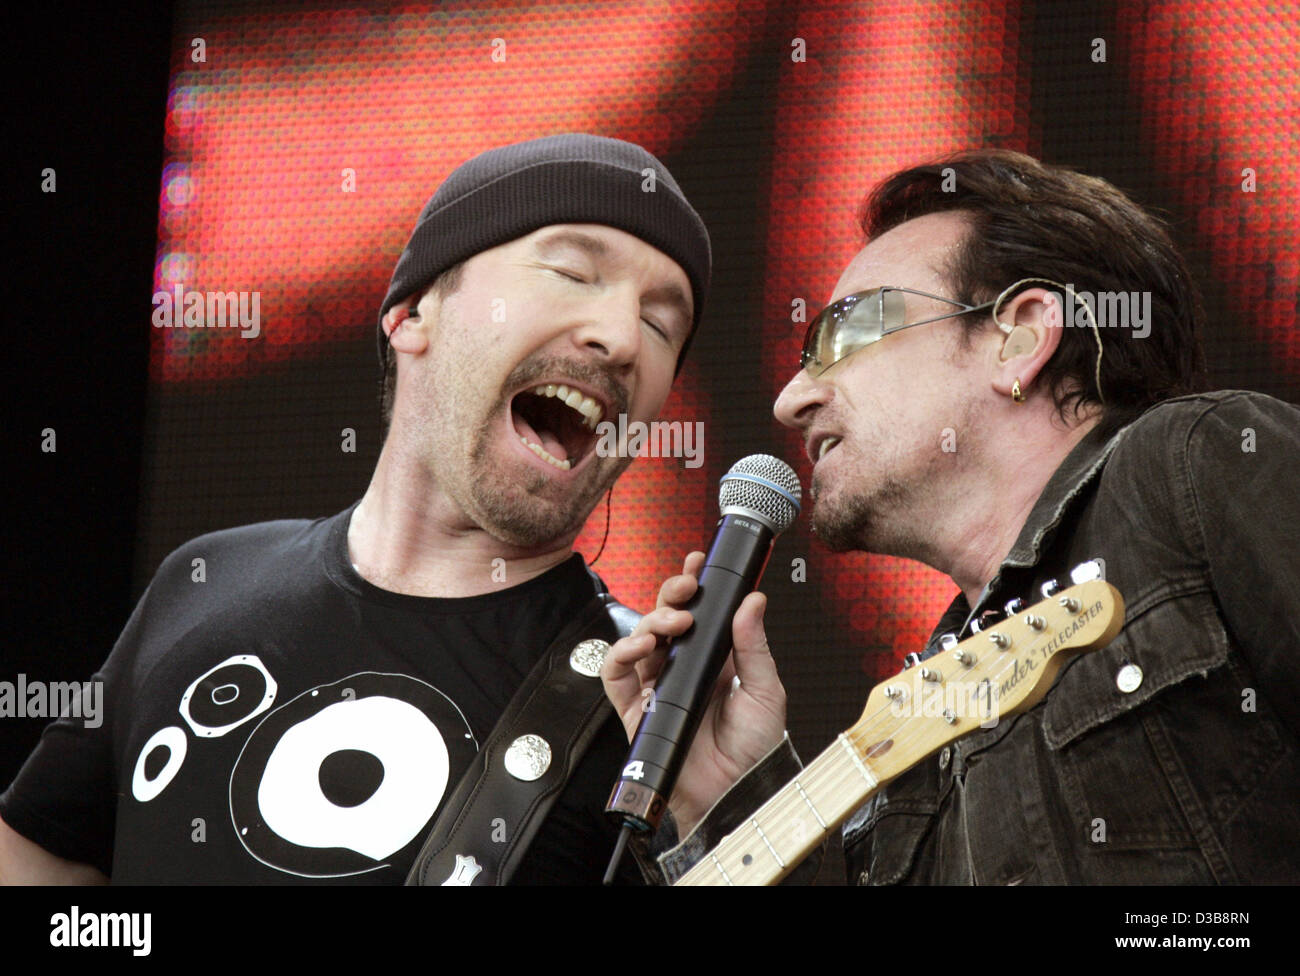 (dpa) - Bono (R) and guitarist The Edge of the rock group U2 perform during the Live 8 Concert in Hyde Park in London, England, 02 July 2005. The concert, held simultaneously in many cities around the world including Paris, Berlin, Philadelphia and Rome, is intended to call attention to world povert Stock Photo